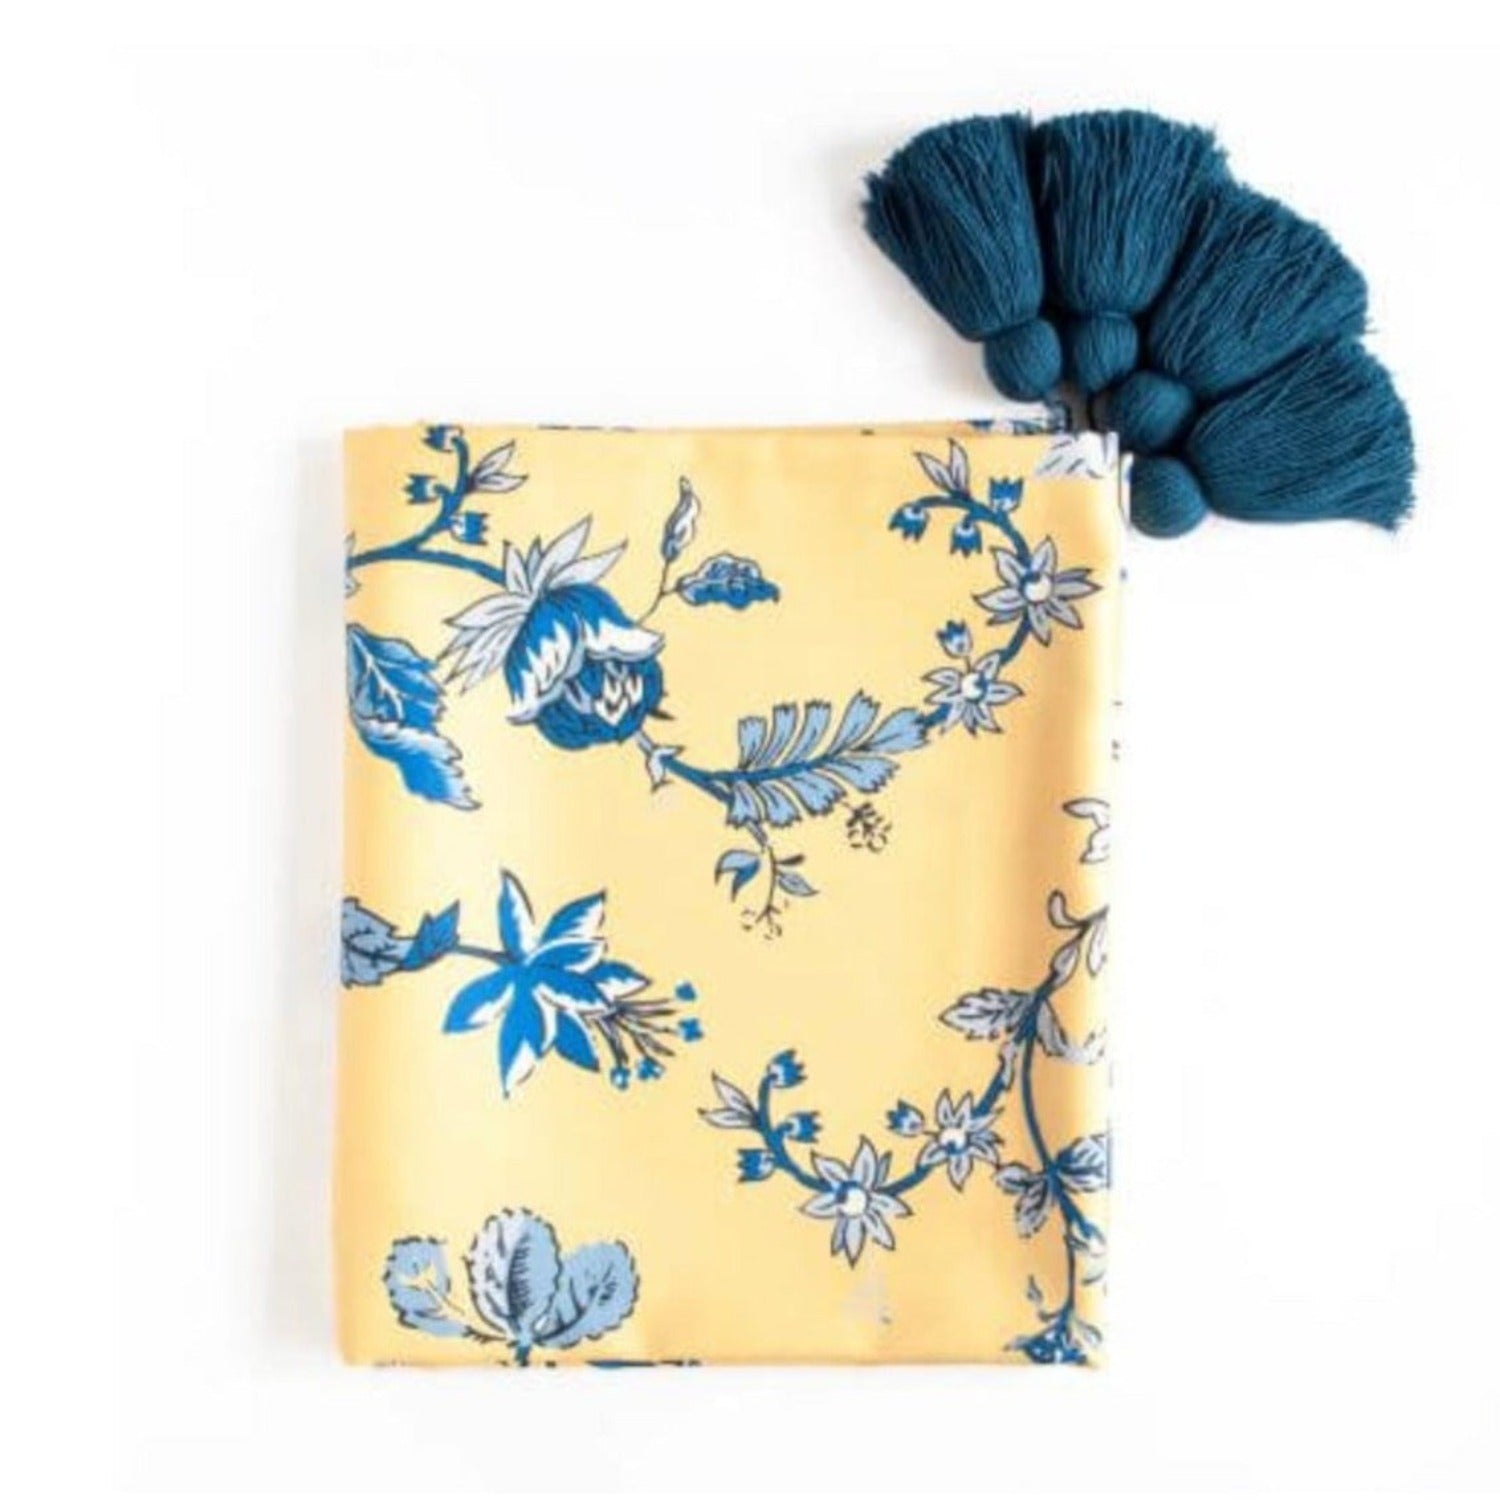 Flowering Vine Tablecloth - Blue & Yellow